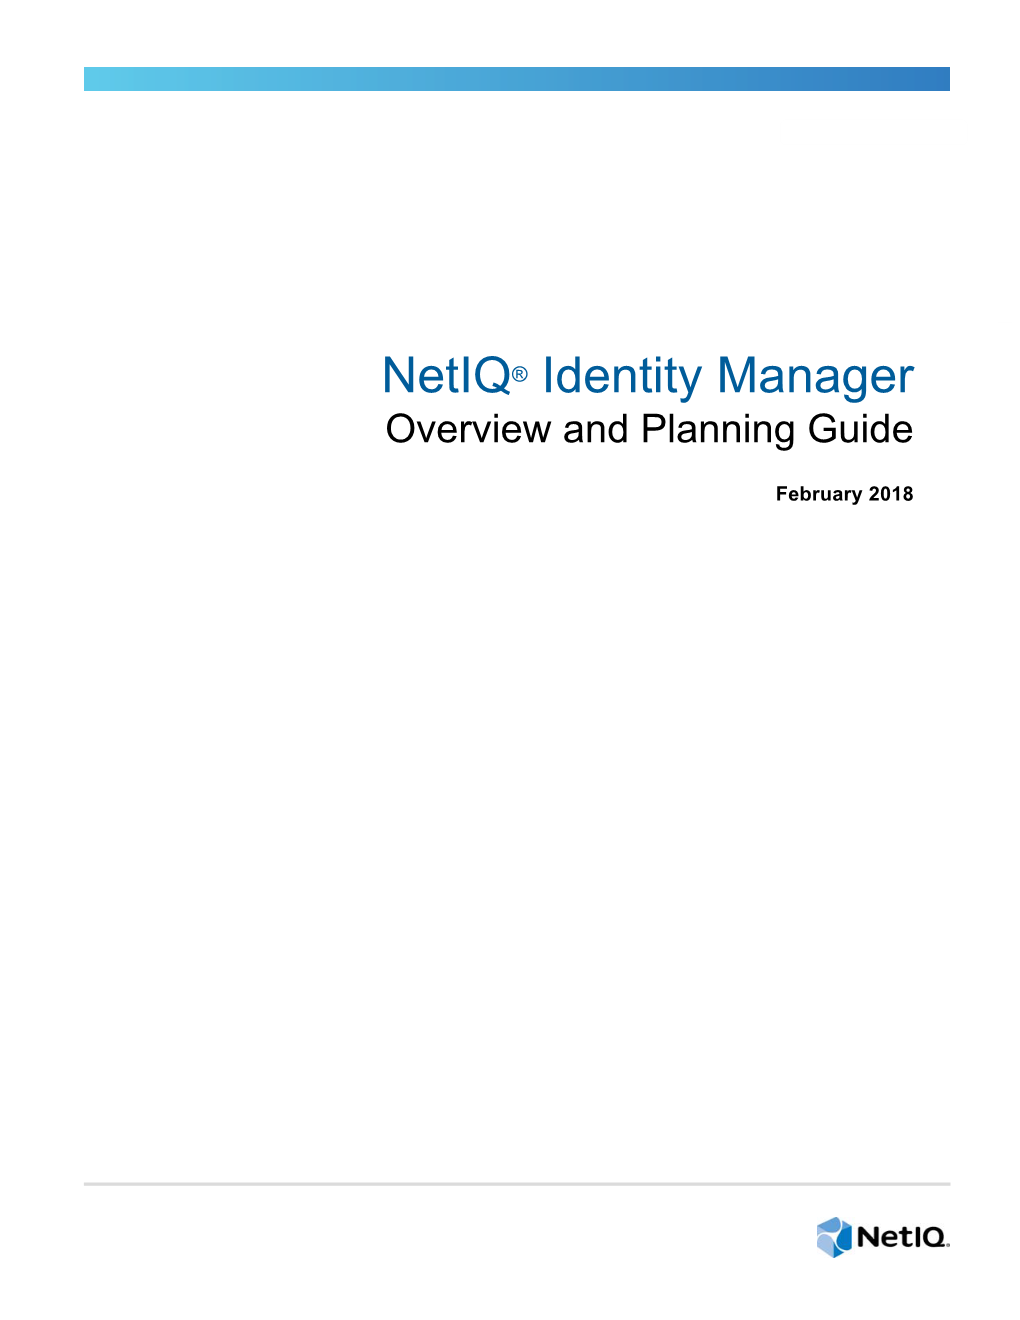 Netiq Identity Manager Overview and Planning Guide